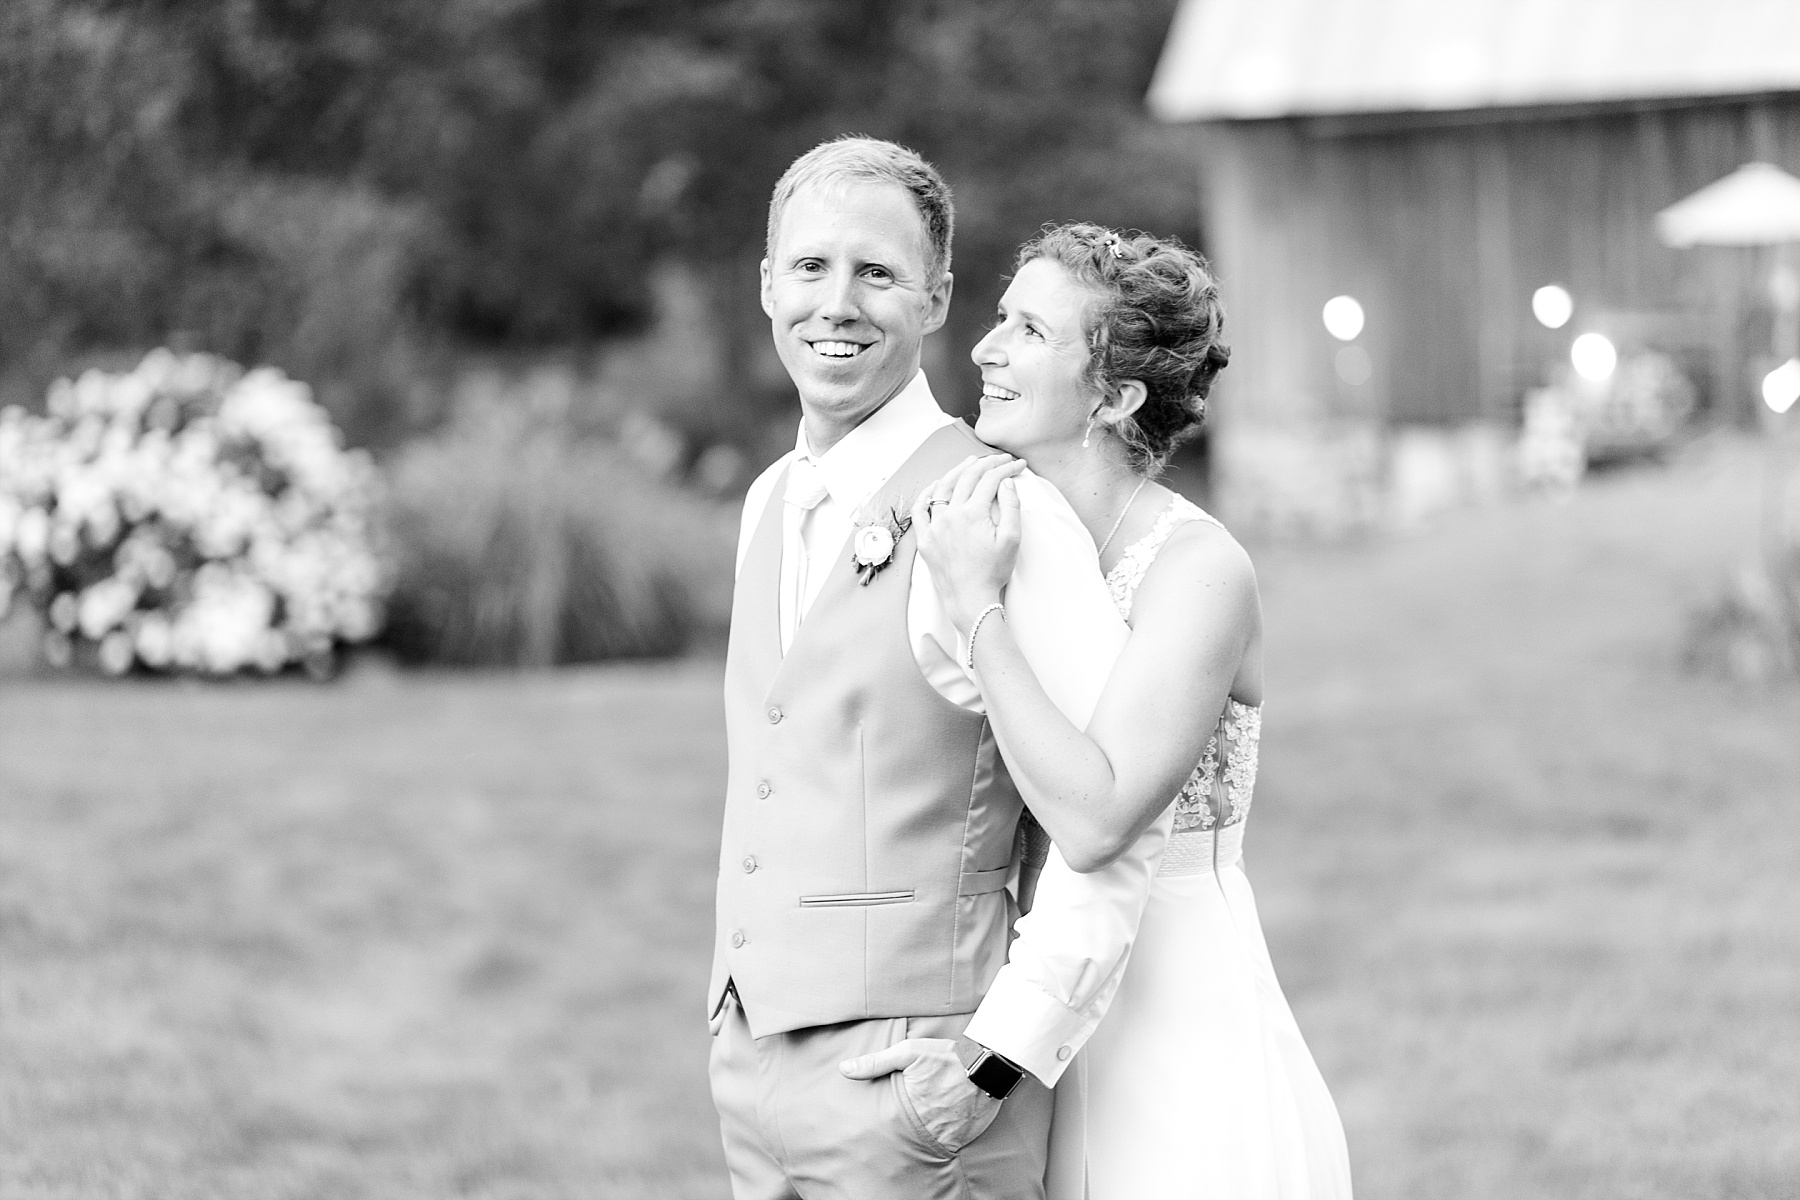 We ran for cover when the rain came, and ran for the fields when the sun peeked out. Such a romantic wedding at The Enchanted Barn for Susan & Alex.